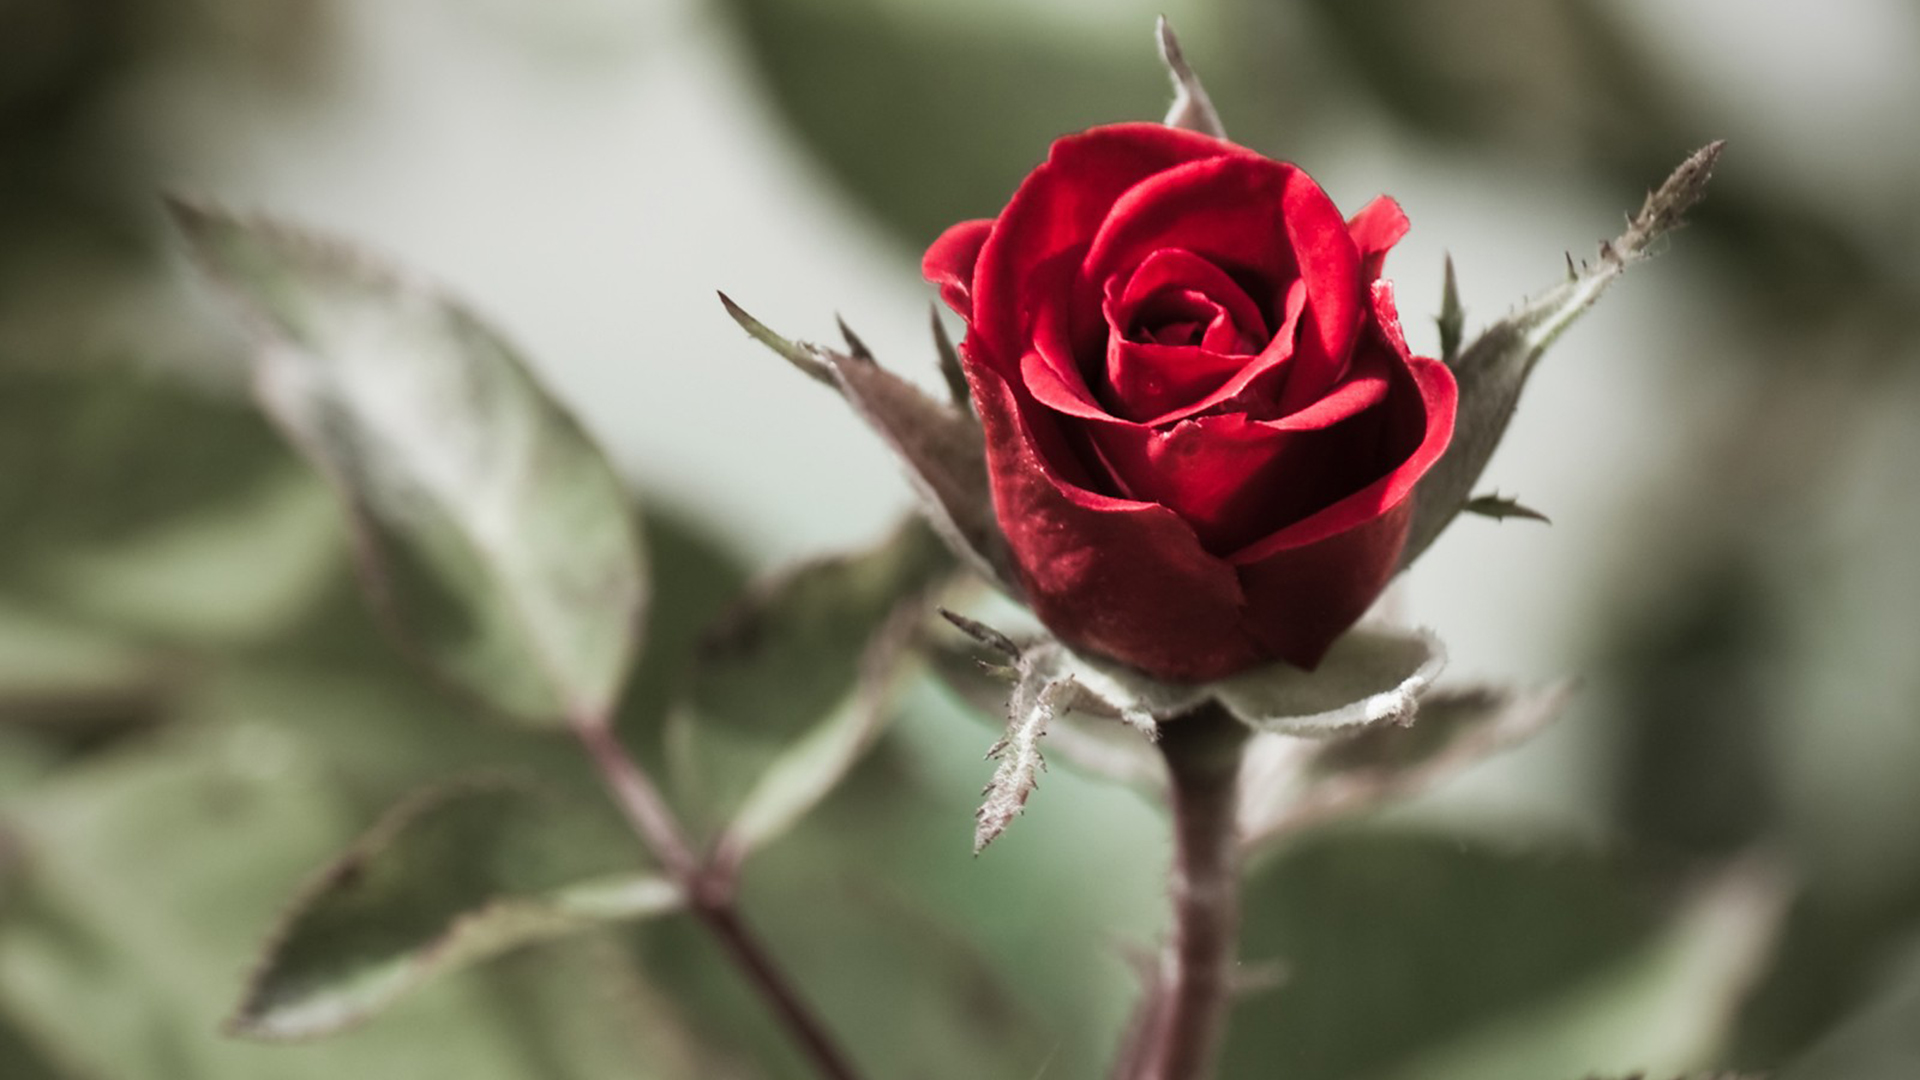 Red Rose Flowers Background Nature Desktop wallpapers HD free   173488